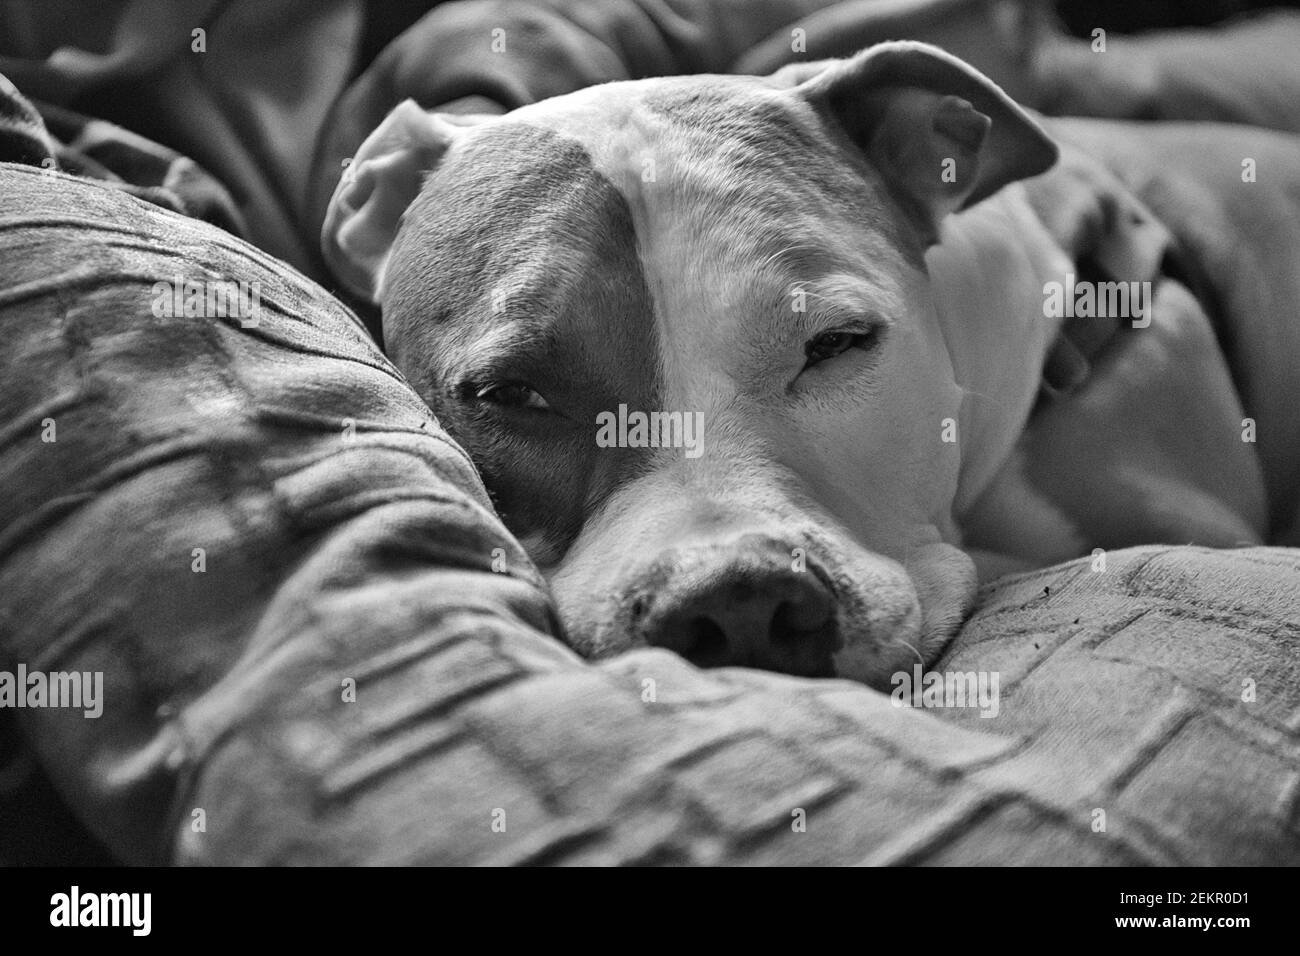 A mixed breed pitbull dog (American Staffordshire and American) (Canis lupus familiaris) dozes on a couch. Stock Photo